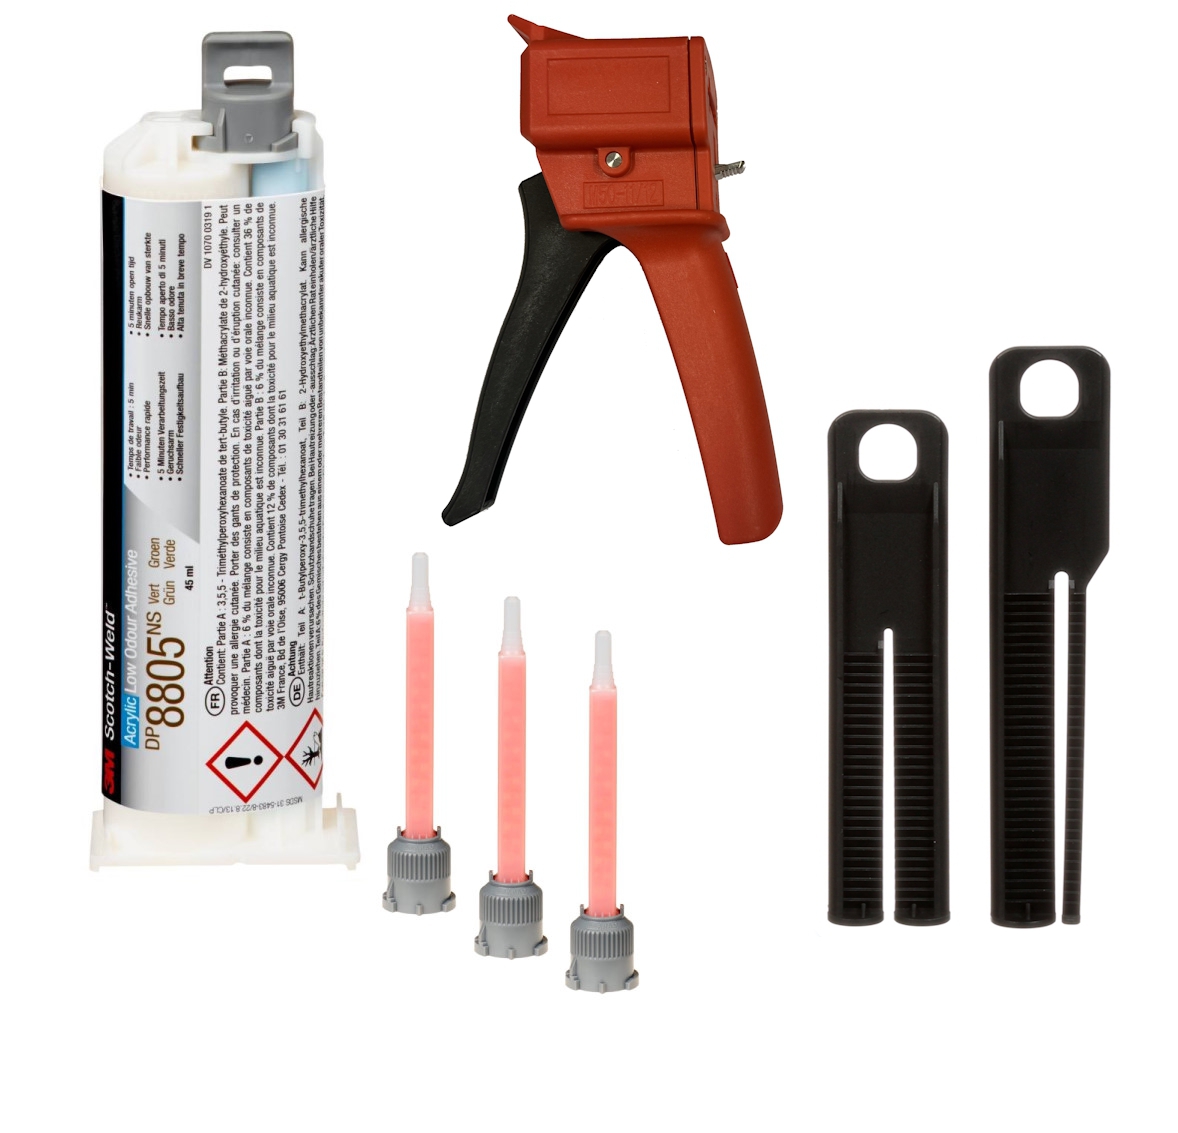 Starter Set: 1x 3M Scotch-Weld 2-component construction adhesive EPX System DP8805NS, green, 45 ml 1x S-K-S hand tool for EPX 38 to 50 ml cartridges incl. feed piston 2:1